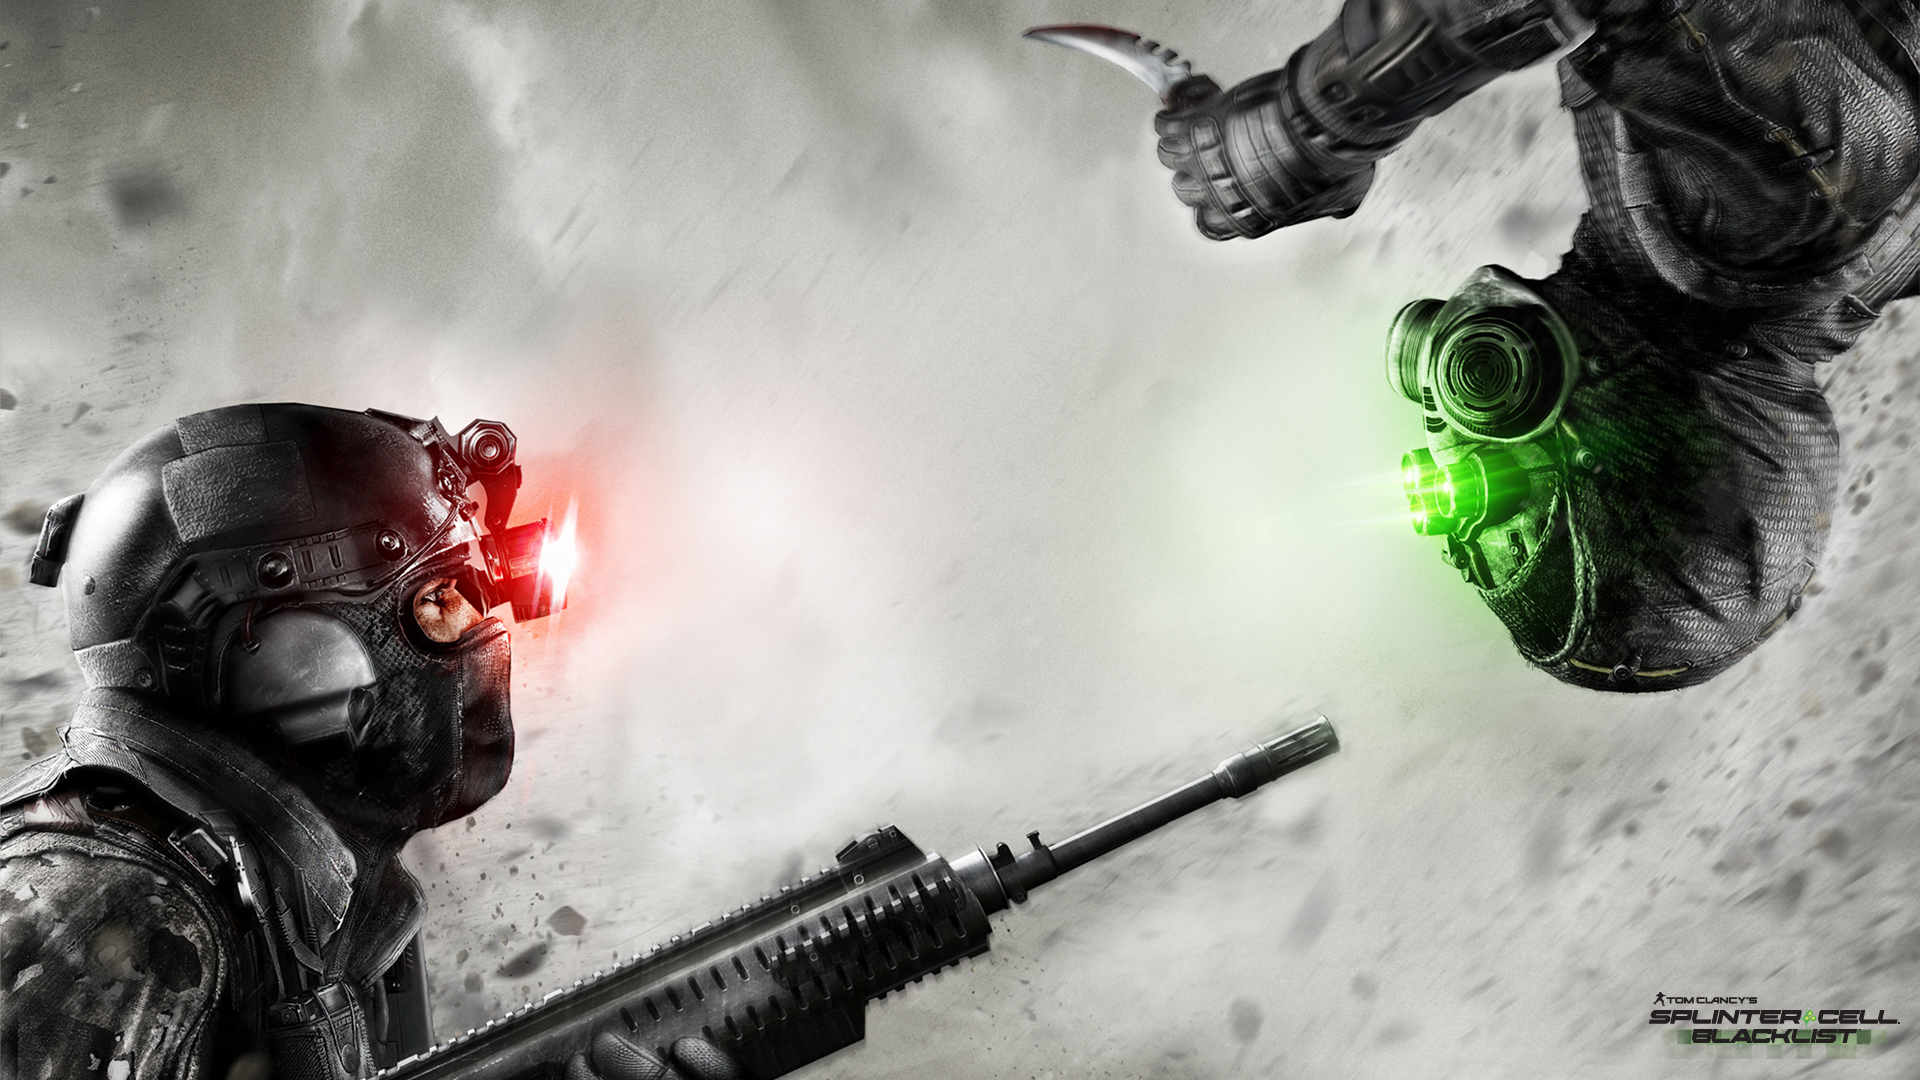 Two Wallpaper From Video Game Splinter Cell Blacklist Hq